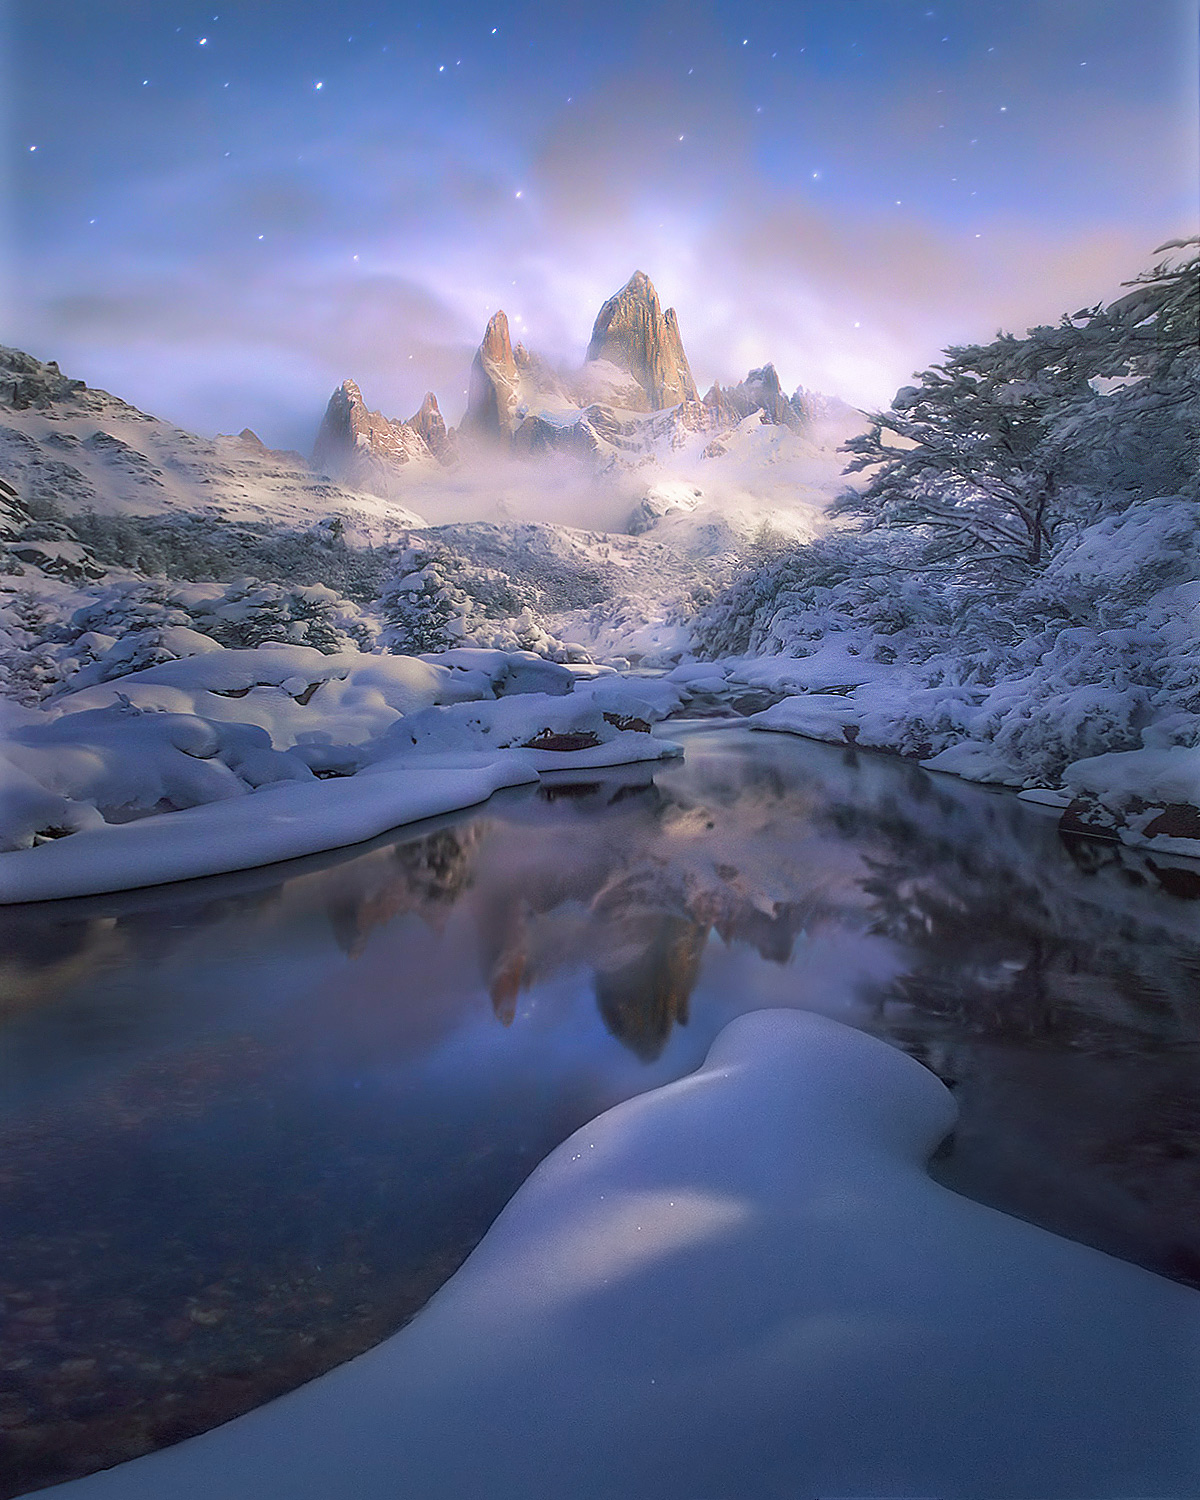 Soft moonlight illuminates a clearing Fitz Roy peak in Patagonia after a heavy winter snowfall.